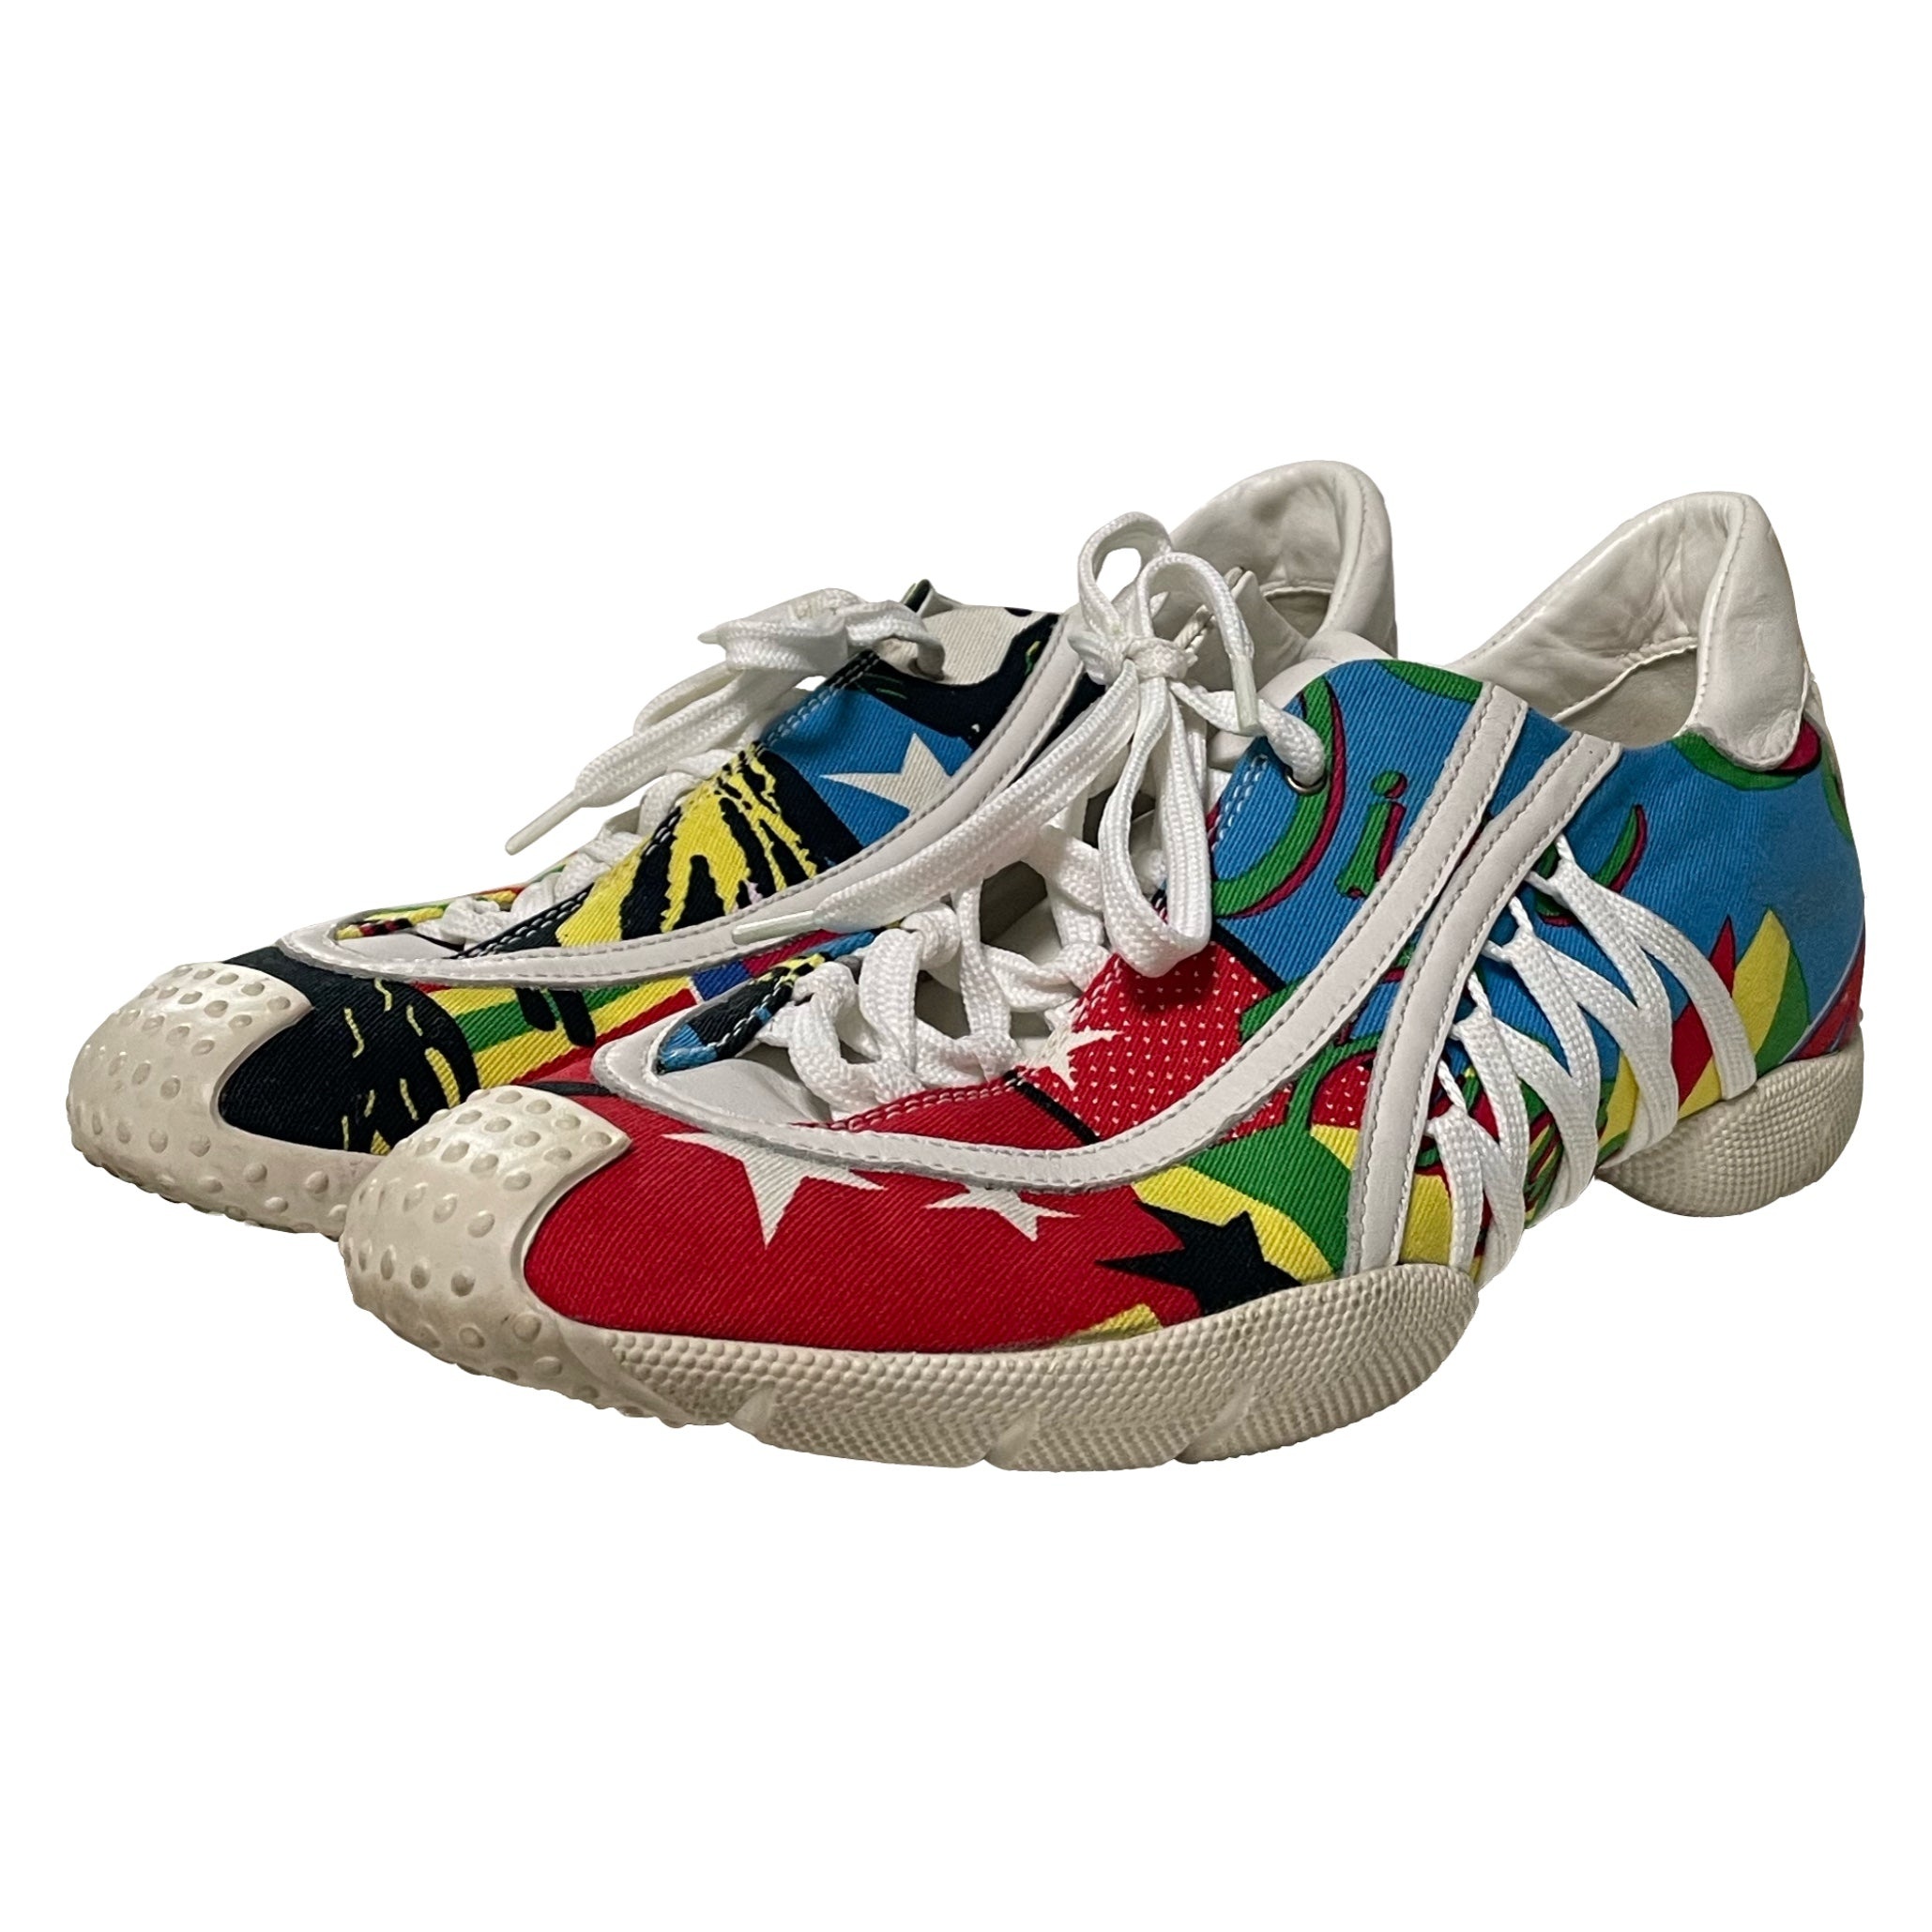 CHRISTIAN DIOR Fall Winter 2003 Rasta Mania Laced Up Sneakers - 1